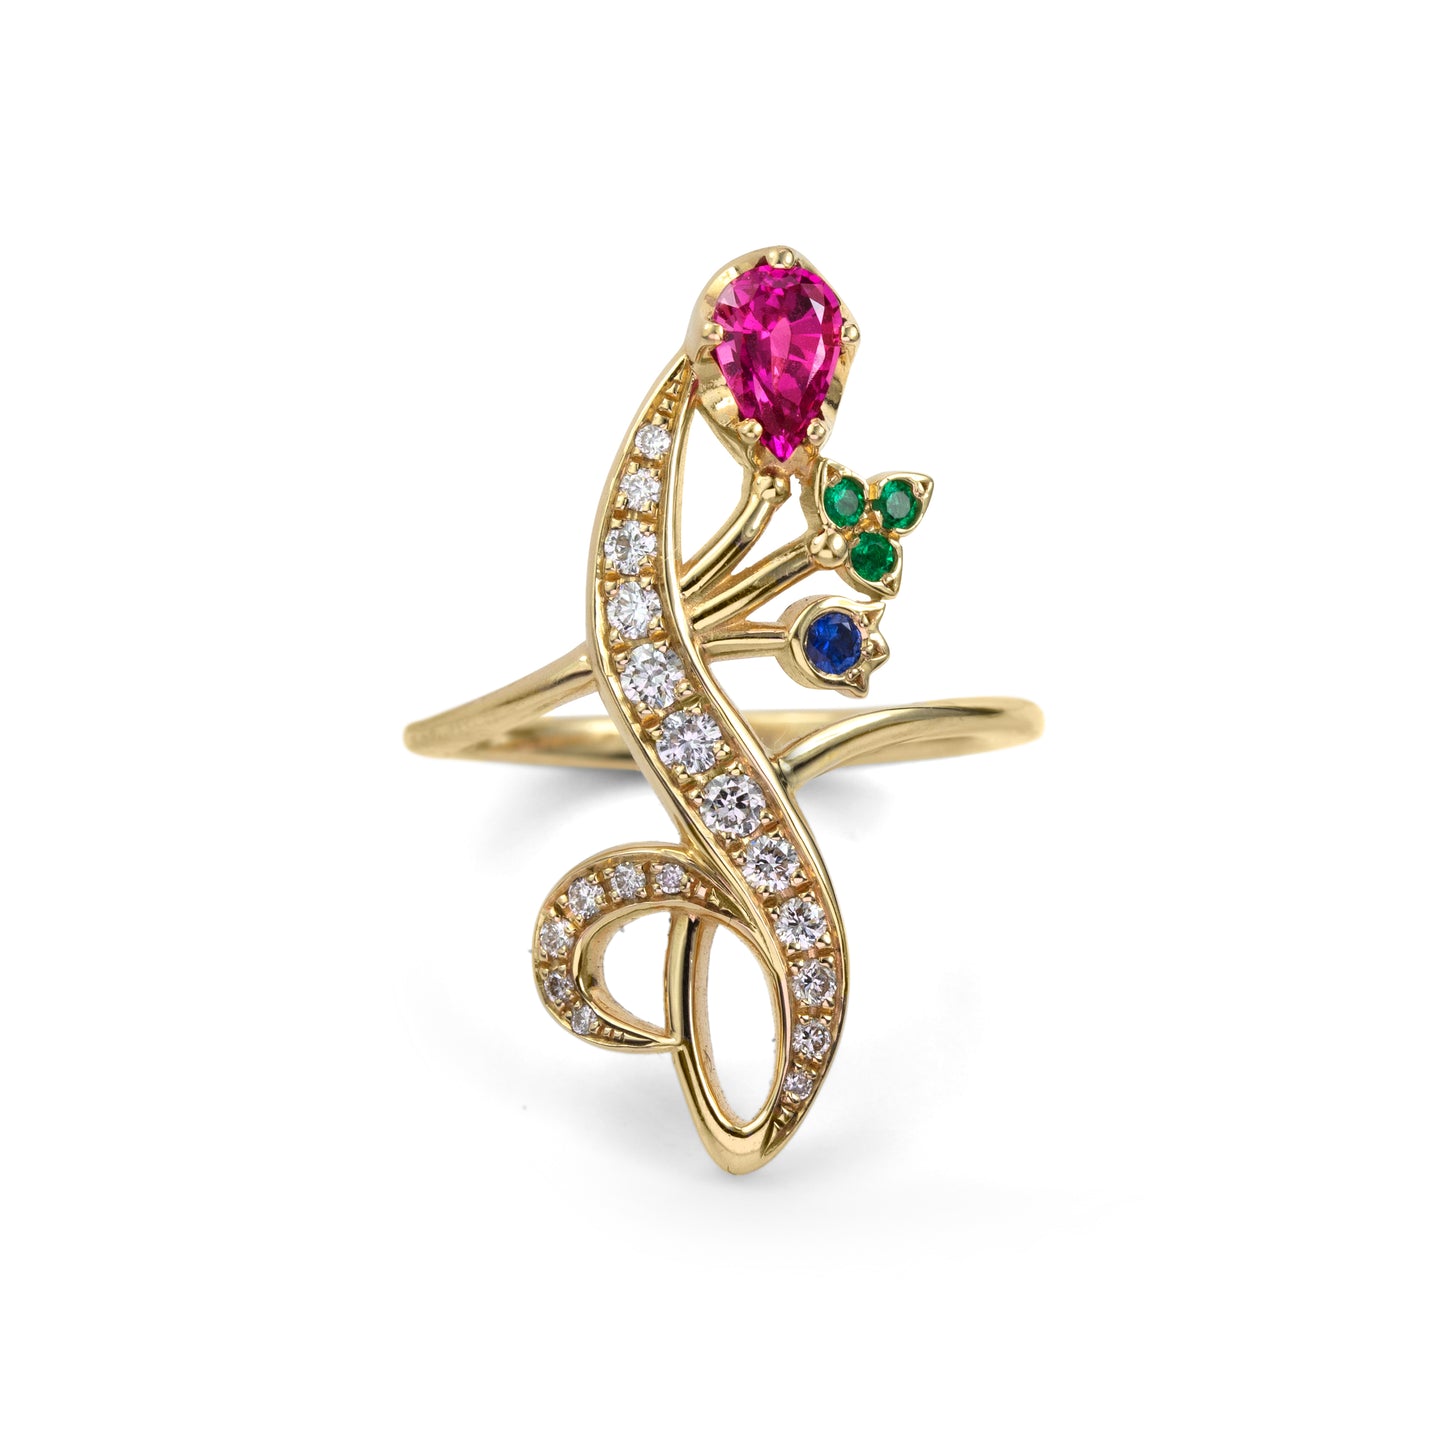 Load image into Gallery viewer, Fancy yellow gold and gemstone giardinetti style  ring with curving diamond set leaf design and multi gem pink sapphire, emerald and blue sapphire  flower accents.
